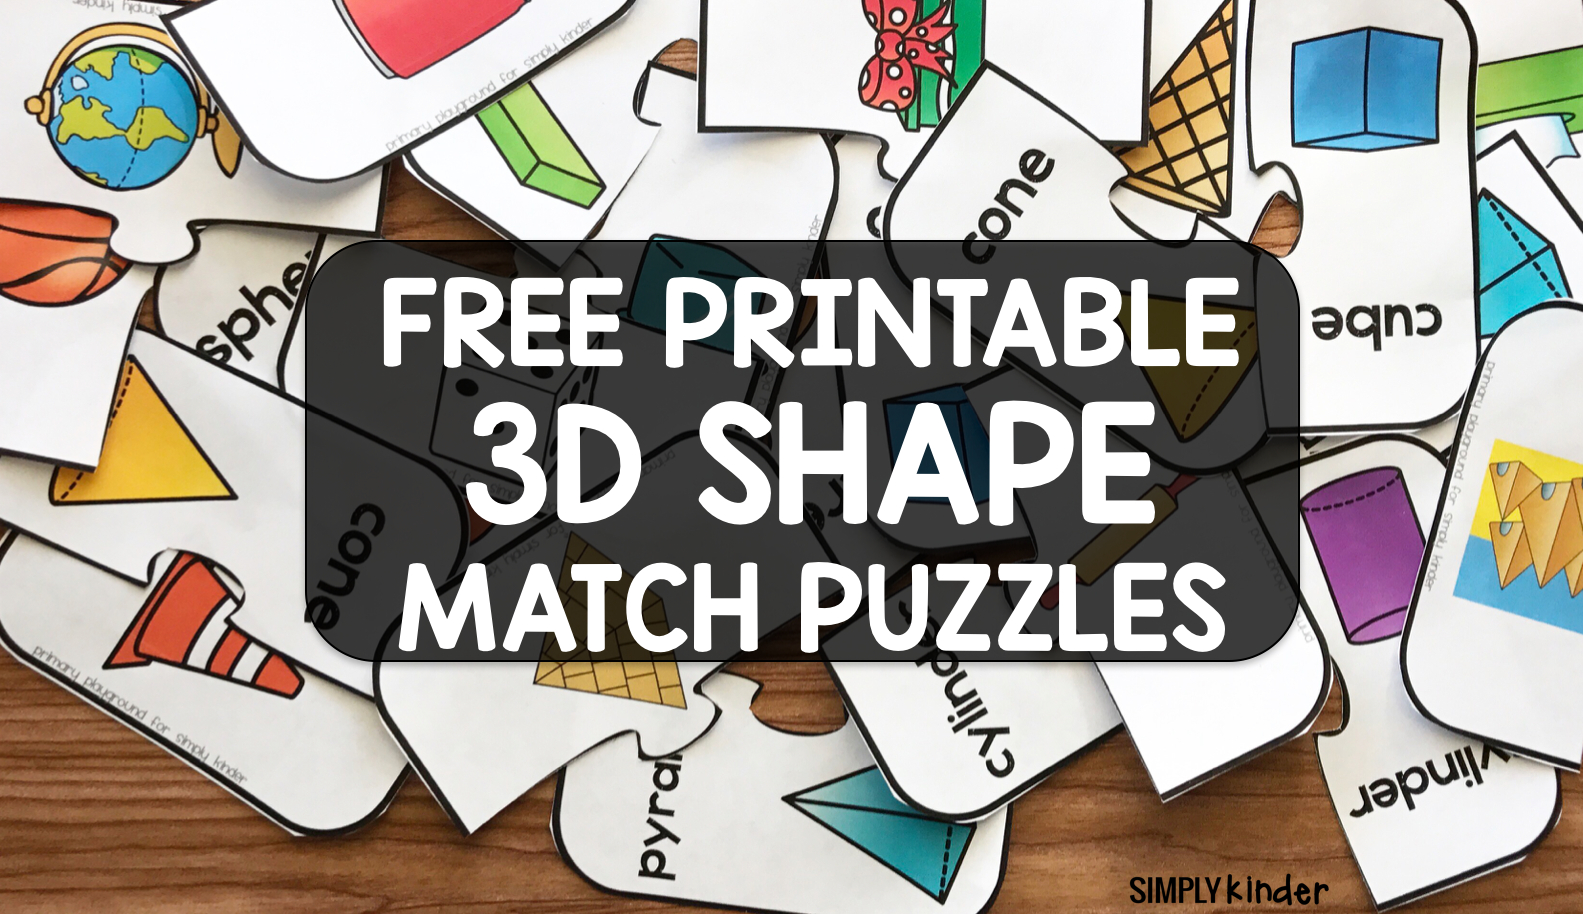 Free Printable 3D Shape Puzzles - Simply Kinder - Printable 3D Puzzles